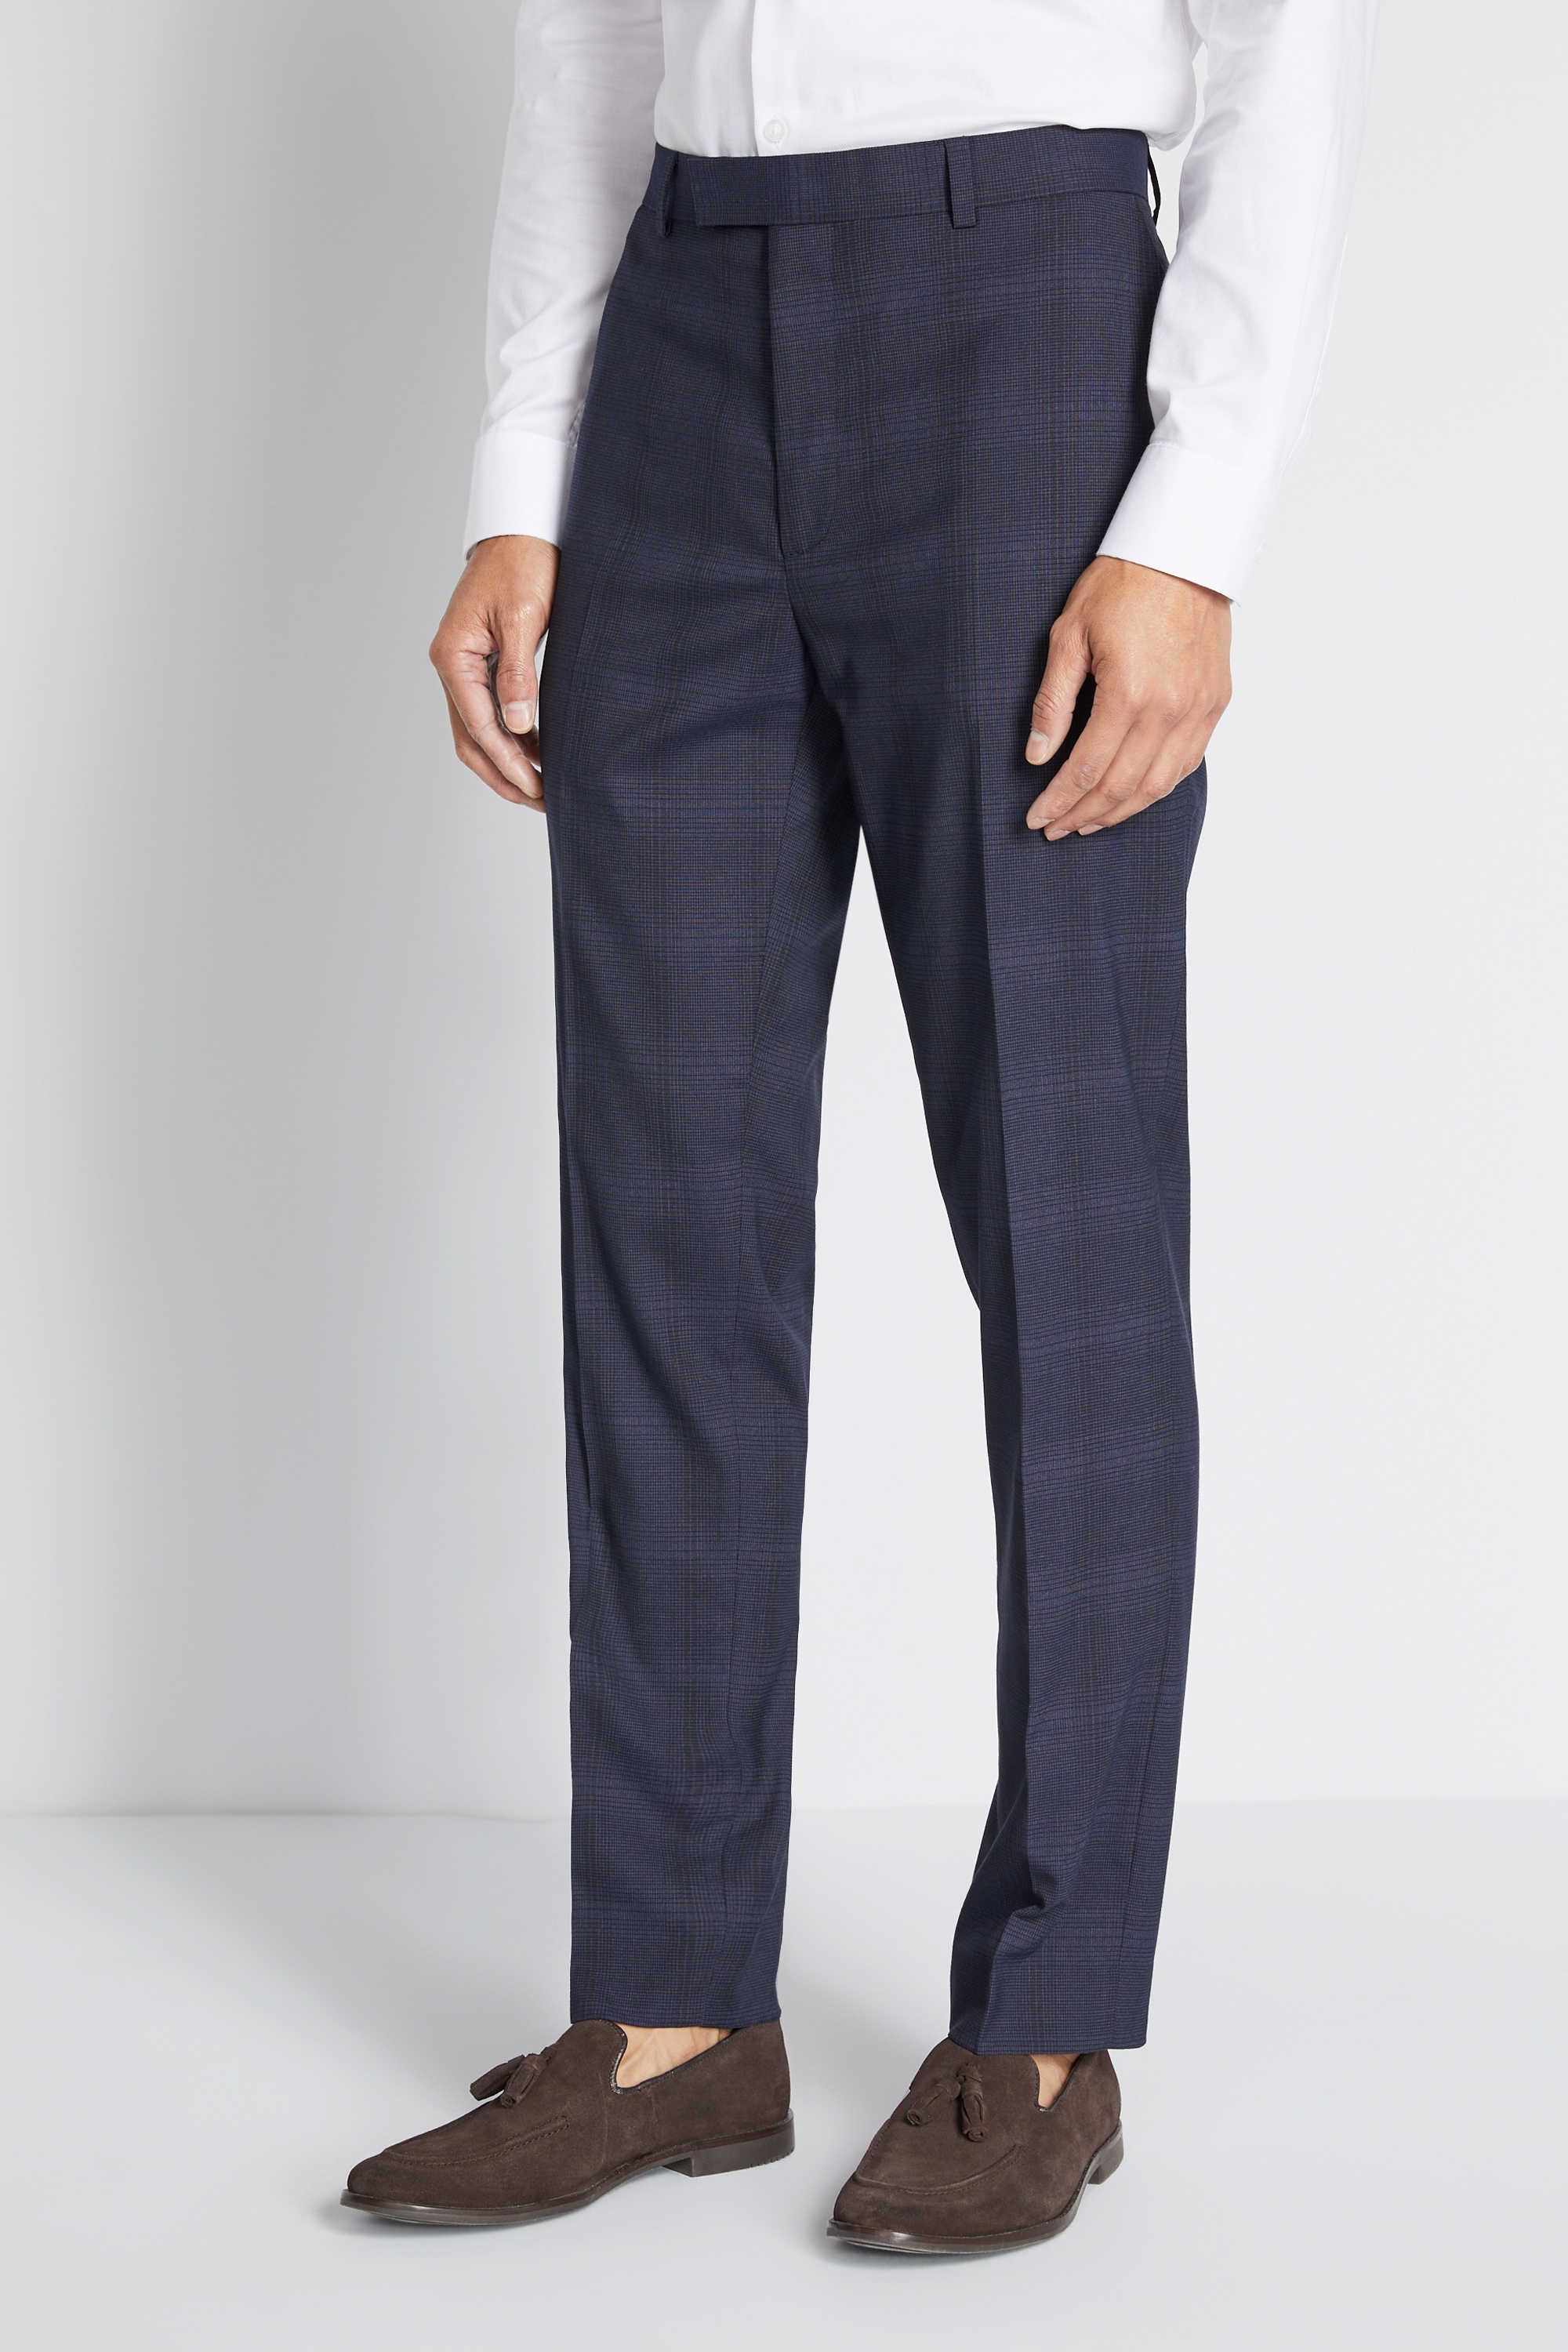 Slim Fit Navy Check Trousers | Buy Online at Moss